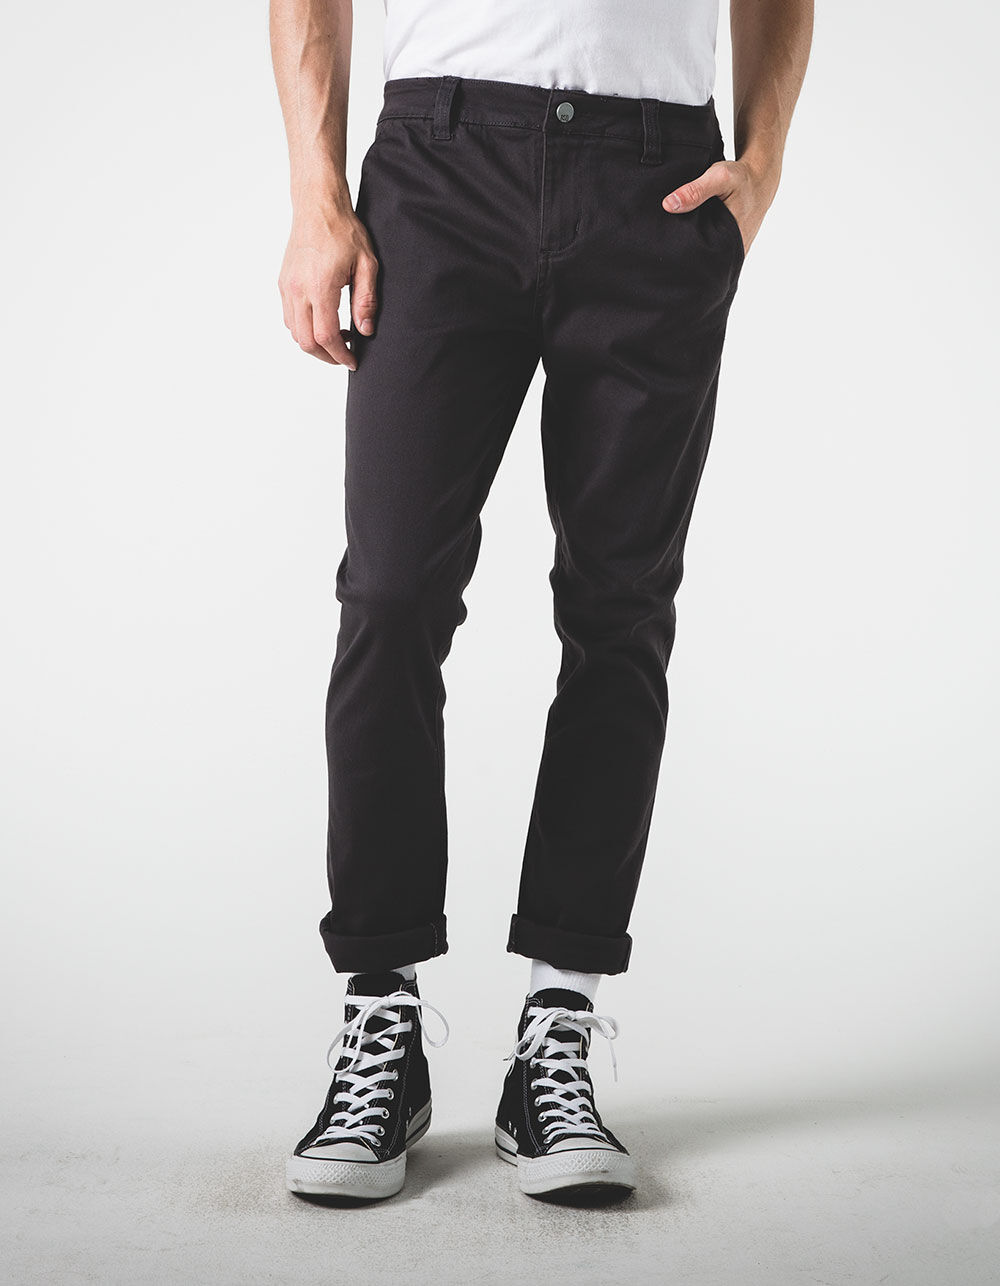 RSQ Seattle Mens Skinny Taper Stretch Chino Pants - CHARC | Tillys